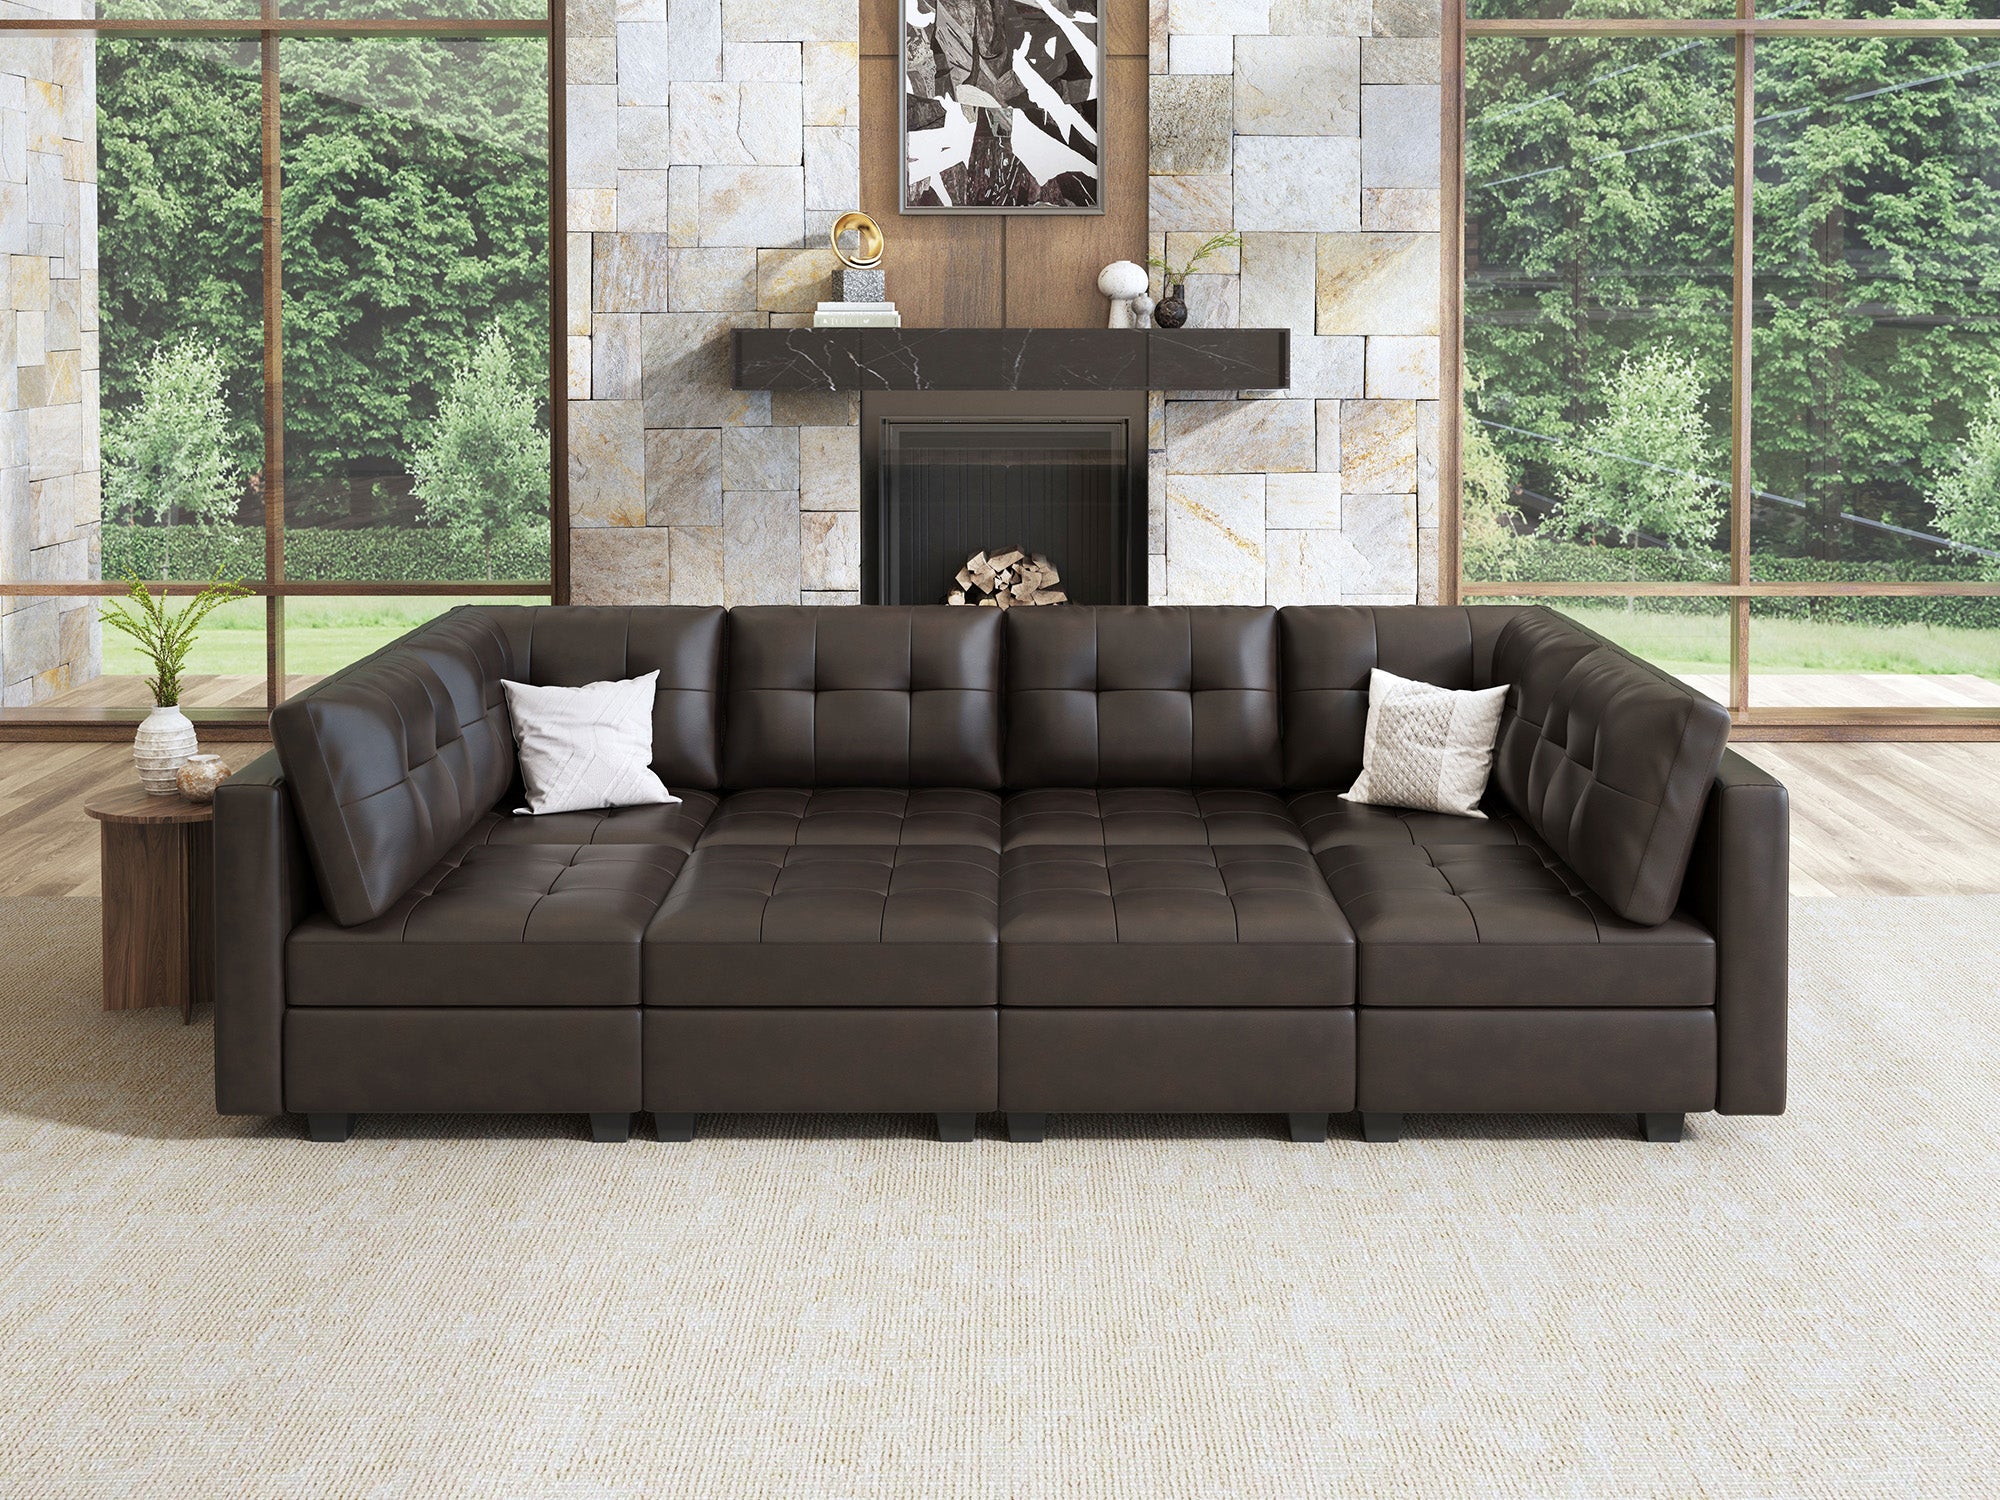 HONBAY 8-Piece Faux Leather Modular Sleeper Sectional With Storage Seat